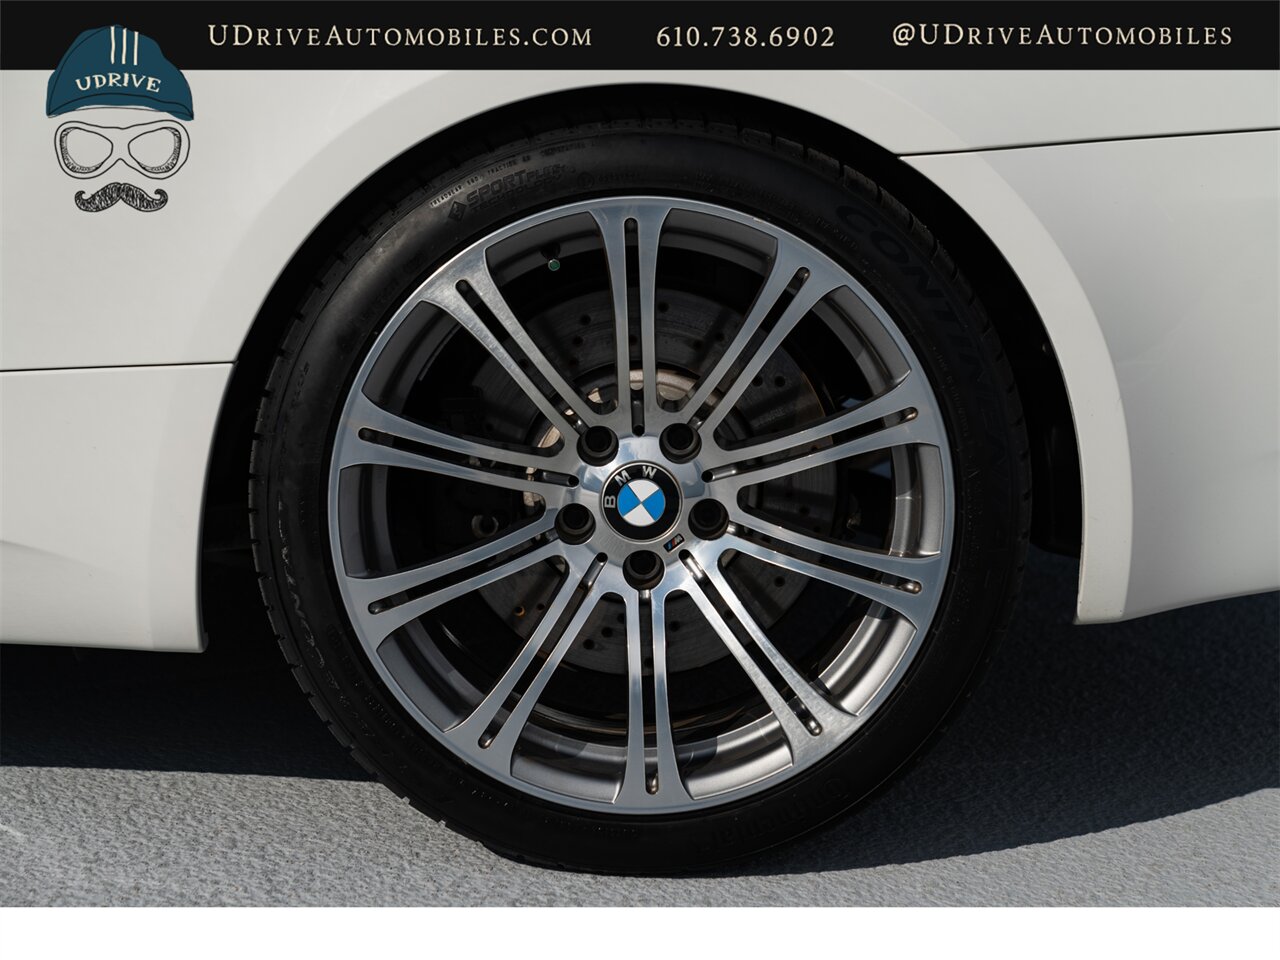 2011 BMW M3  No Nav Carbon Roof Comf Acc 19in Whls 11k Miles - Photo 62 - West Chester, PA 19382